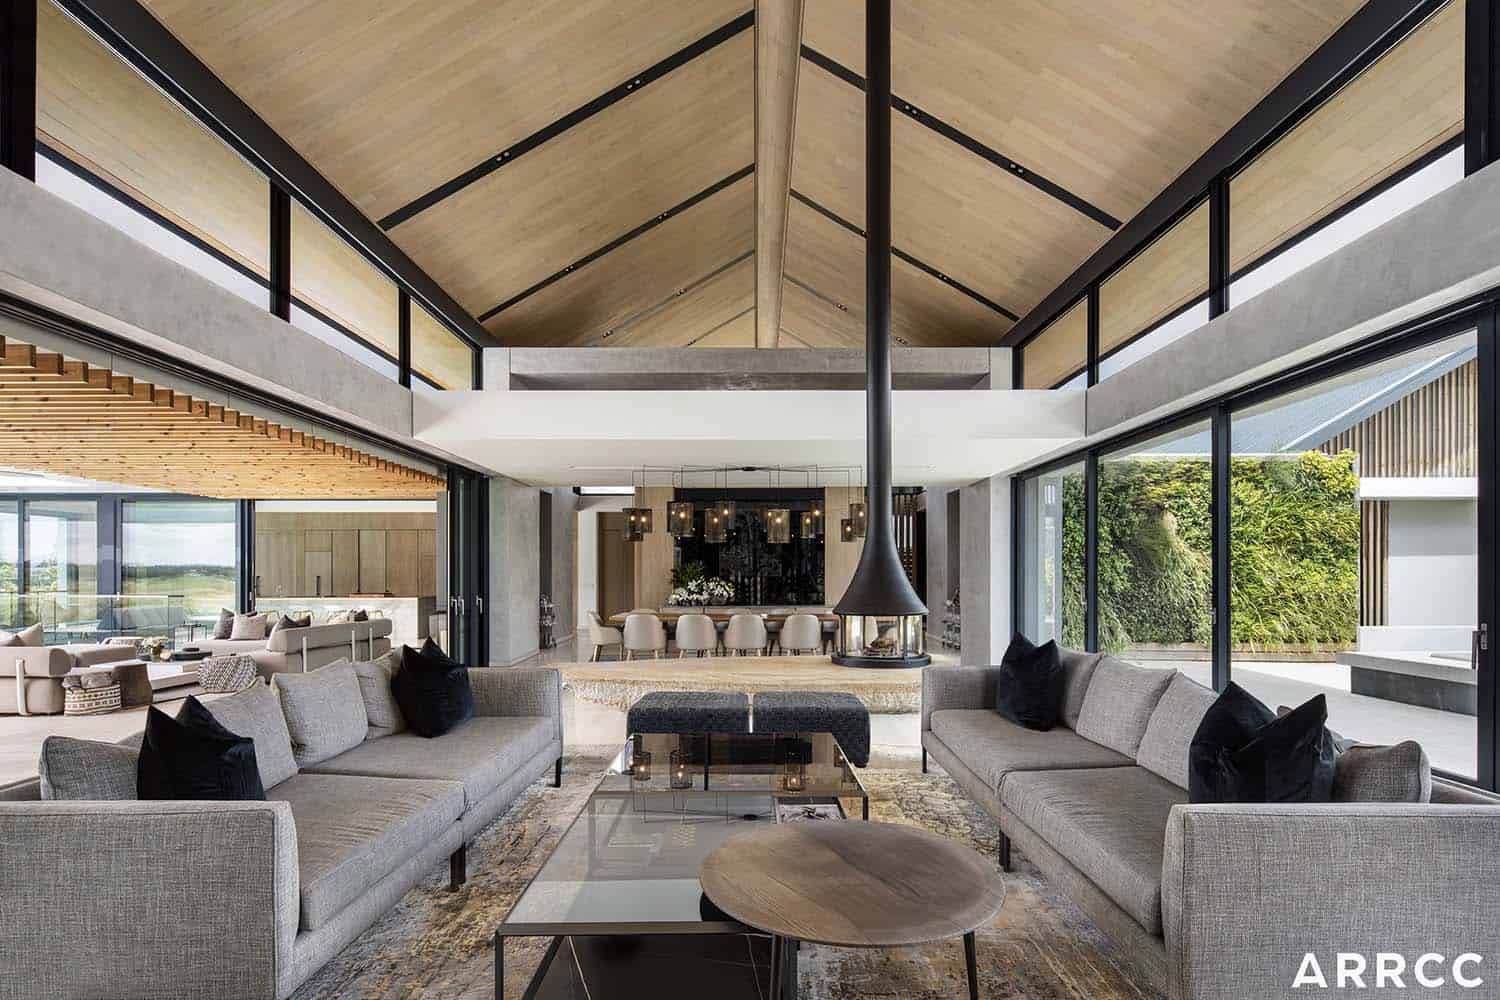 A stunning contemporary country house designed for entertaining in South Africa